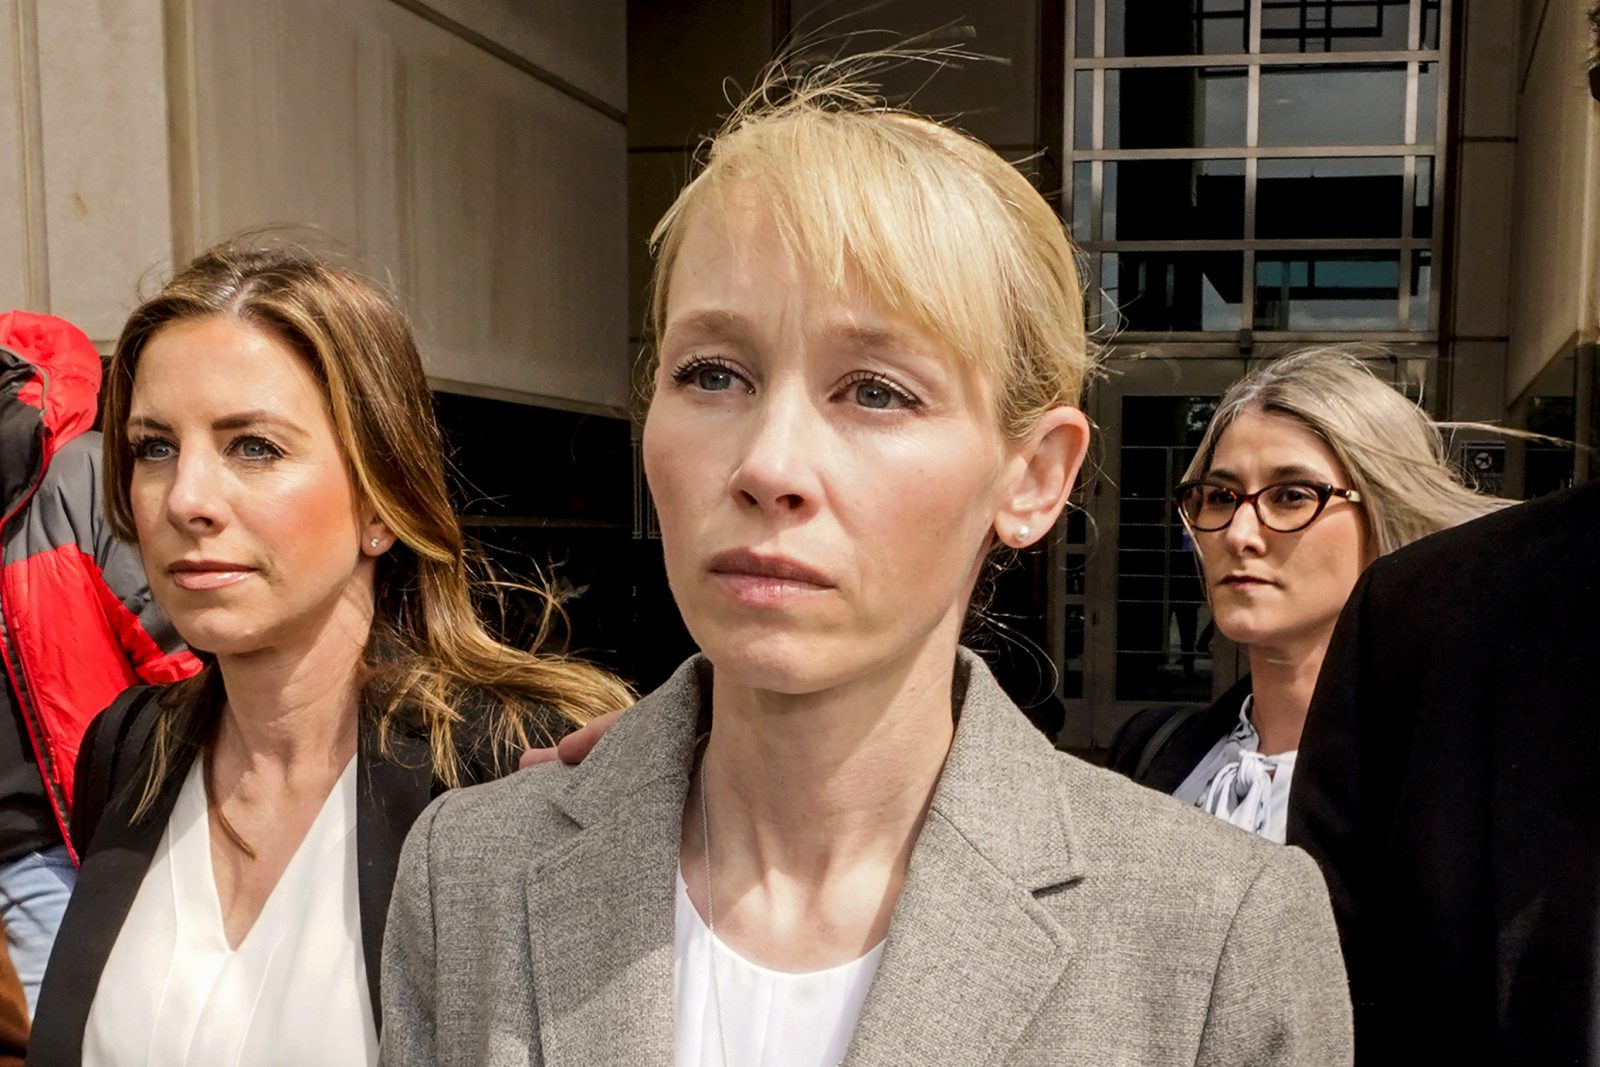 Sherri Papini Kidnapping Hoax: The Story Unfolds